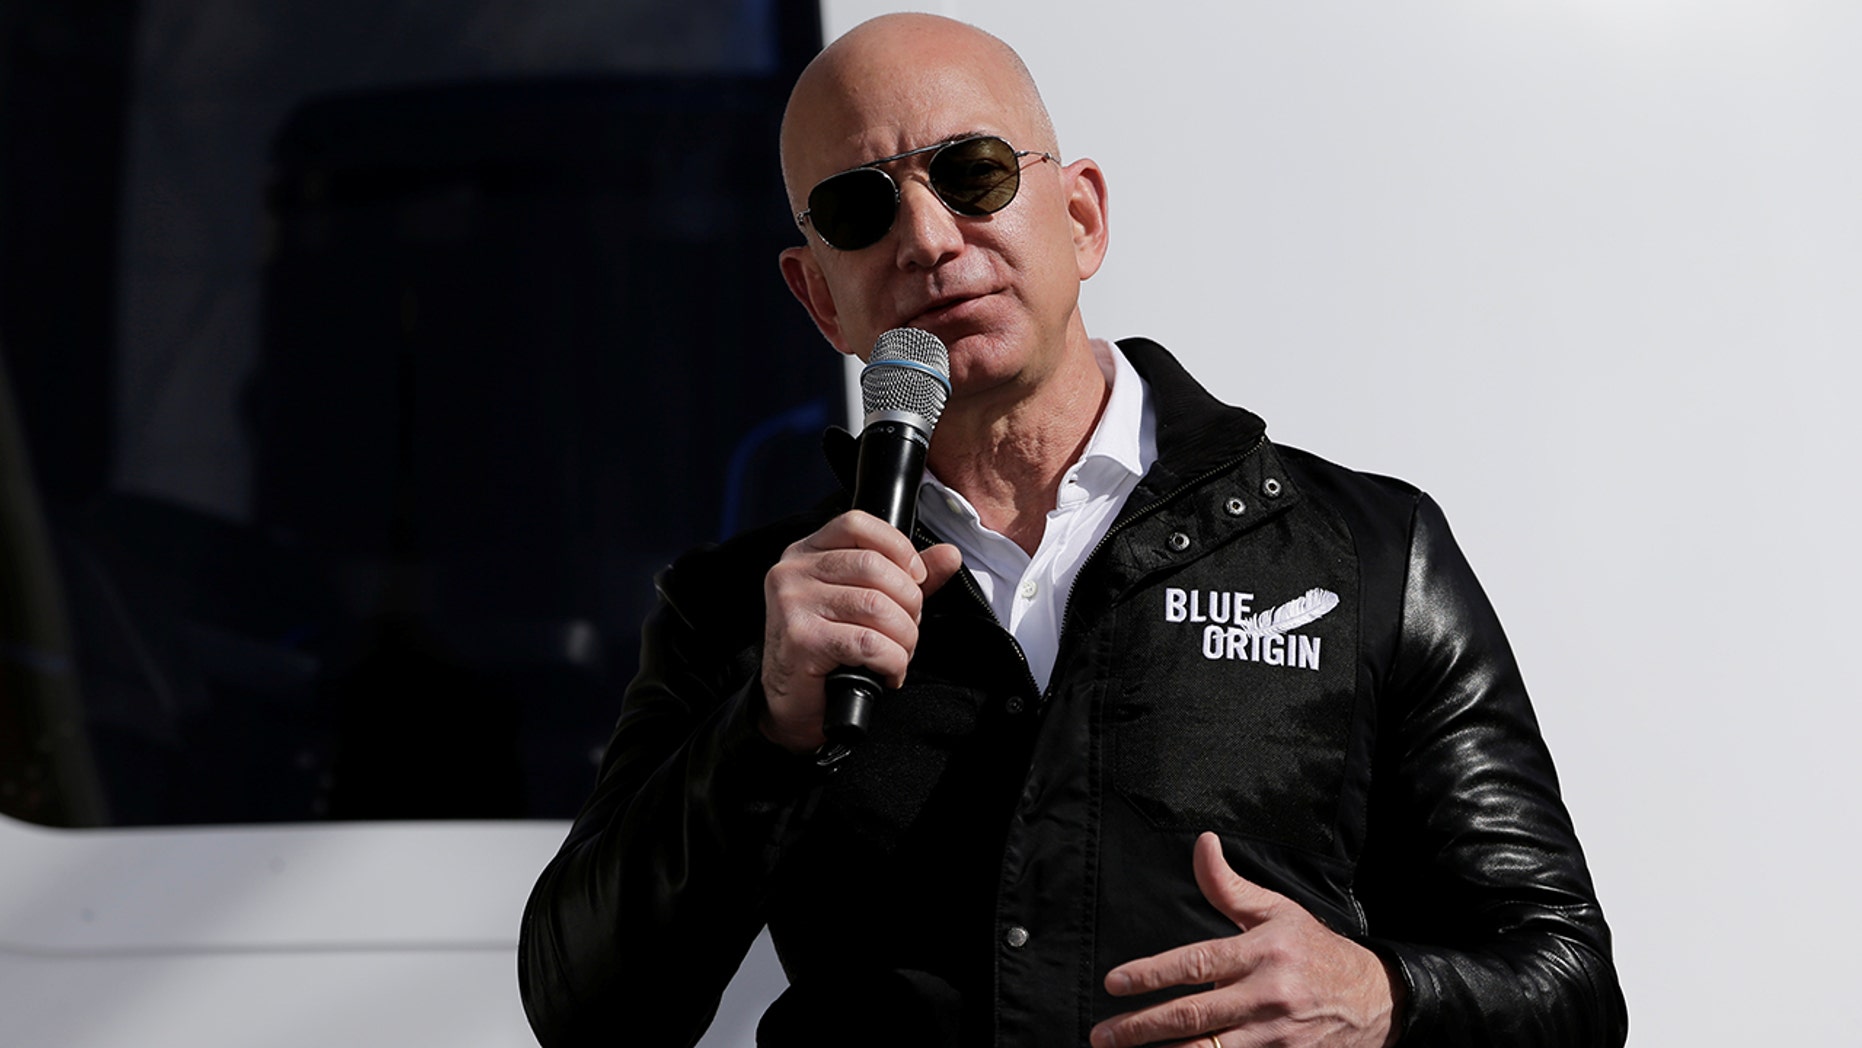 Photo of the case: Jeff Bezos, founder of Amazon and Blue Origin, speaks to the media about the New Shepard rocket recall and the crew capsule mockup at the 33rd Space Symposium in Colorado Springs, Colorado (United States). REUTERS / Isaiah J. Downing - 